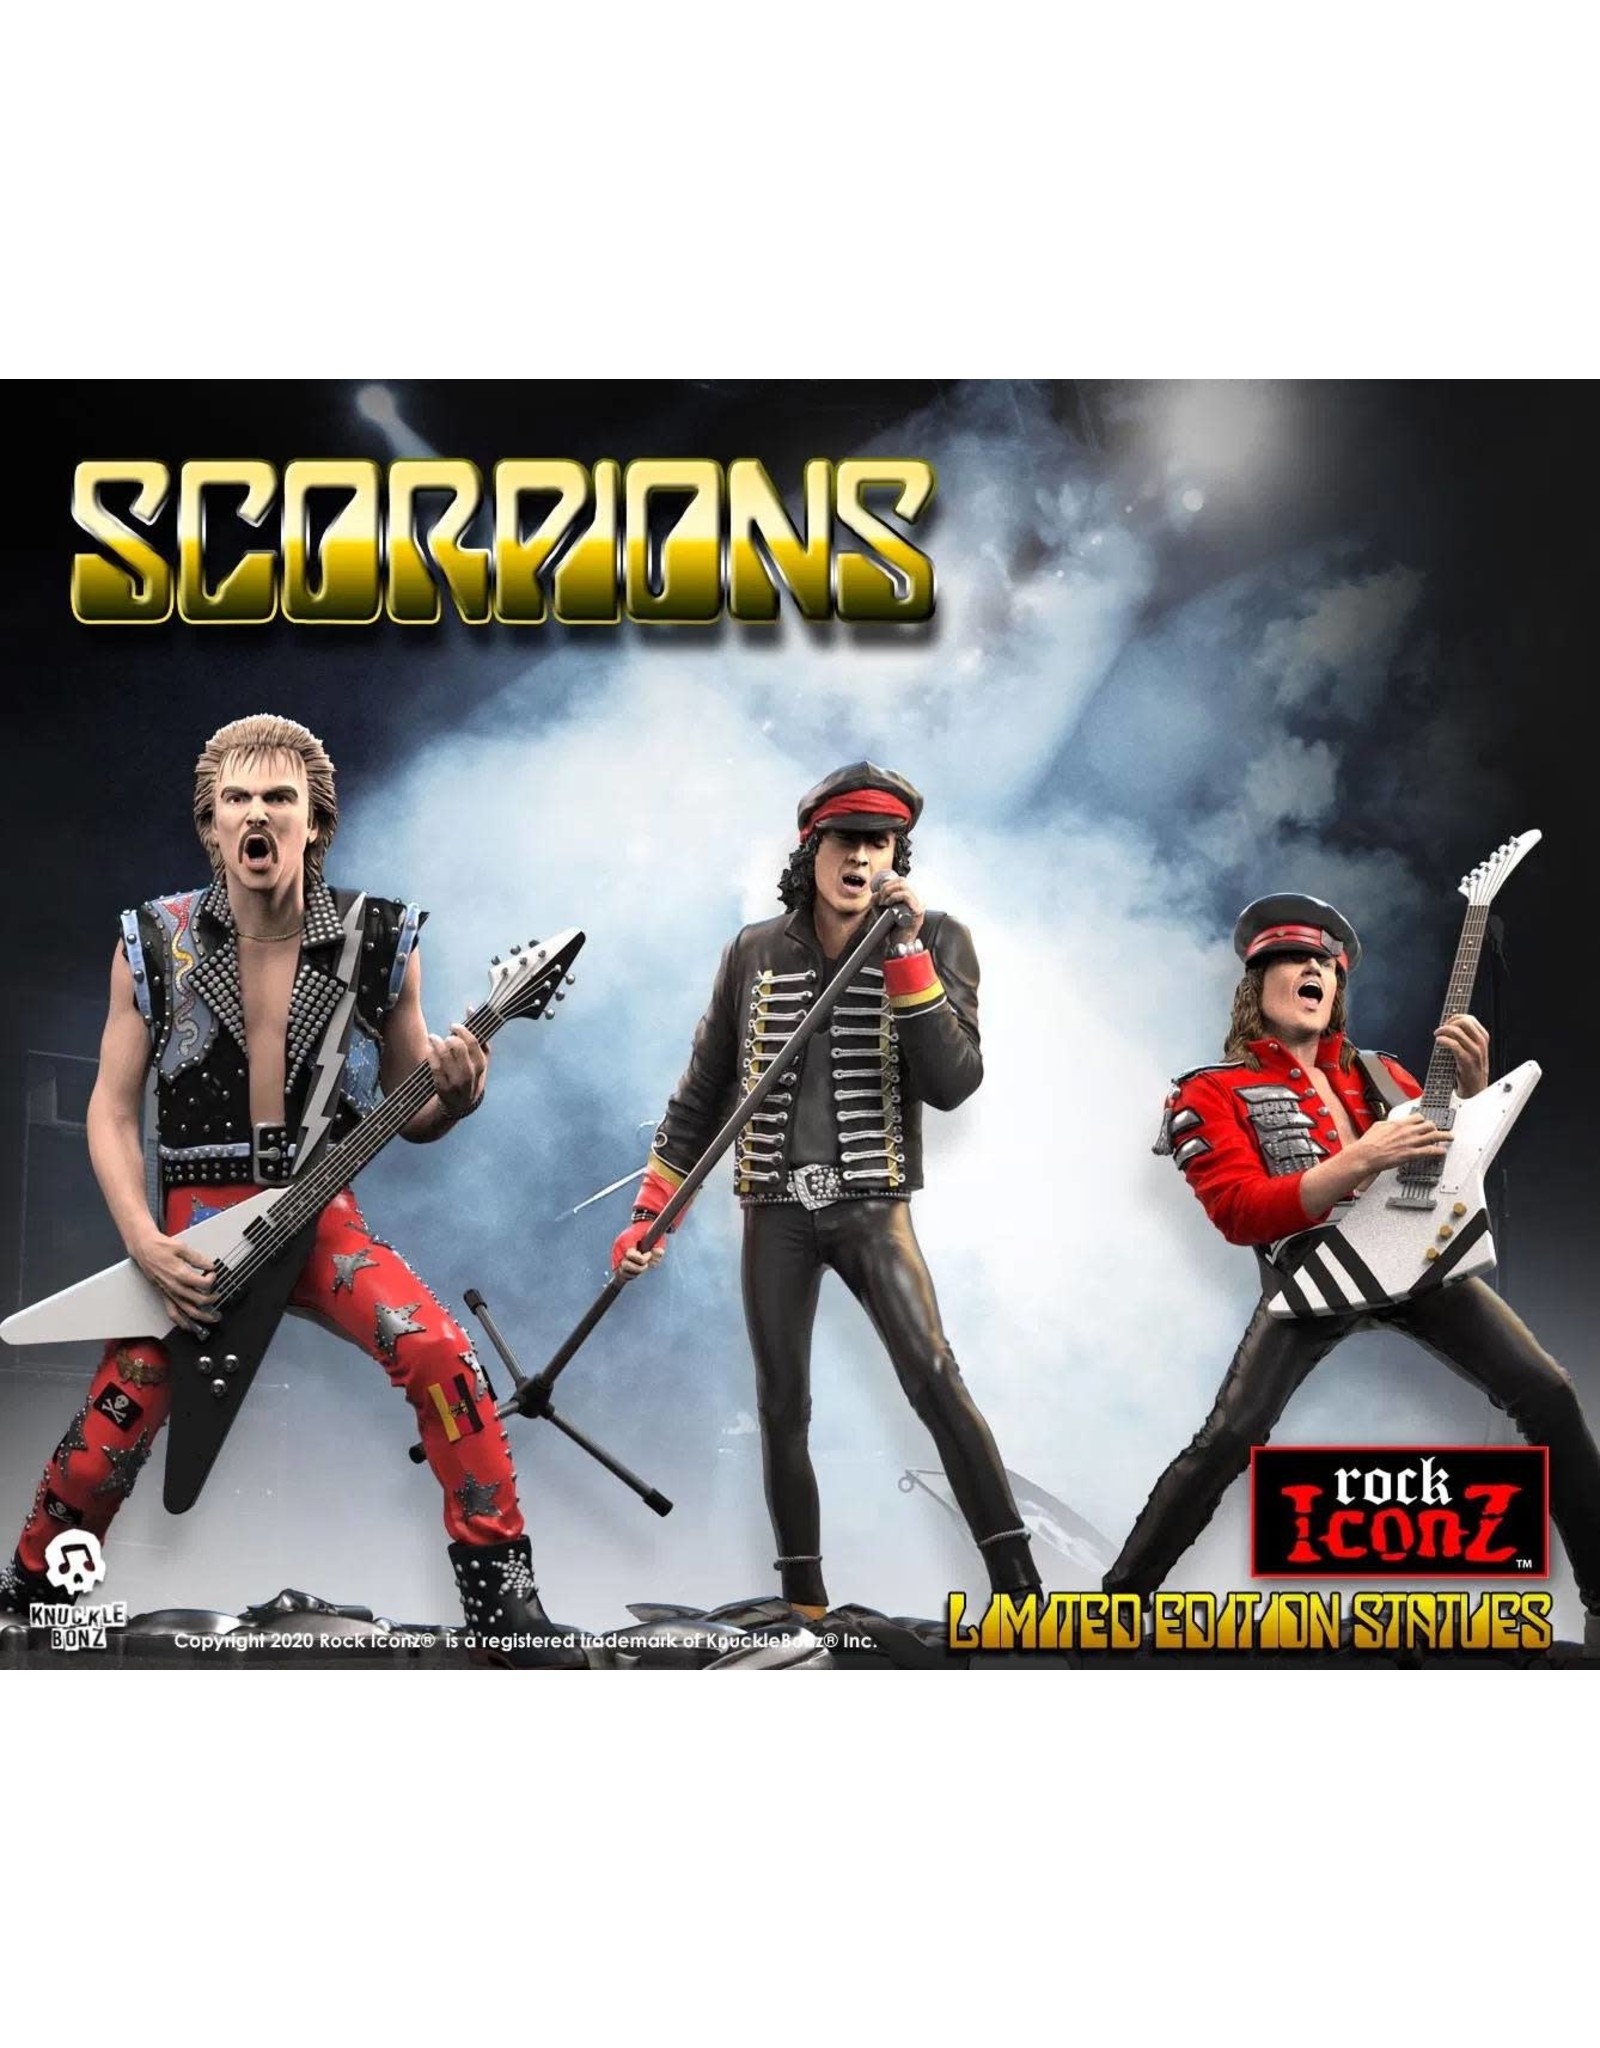 Knucklebonz SCORPIONS Rock Iconz Statue 3-Pack Limited Edition 23 cm